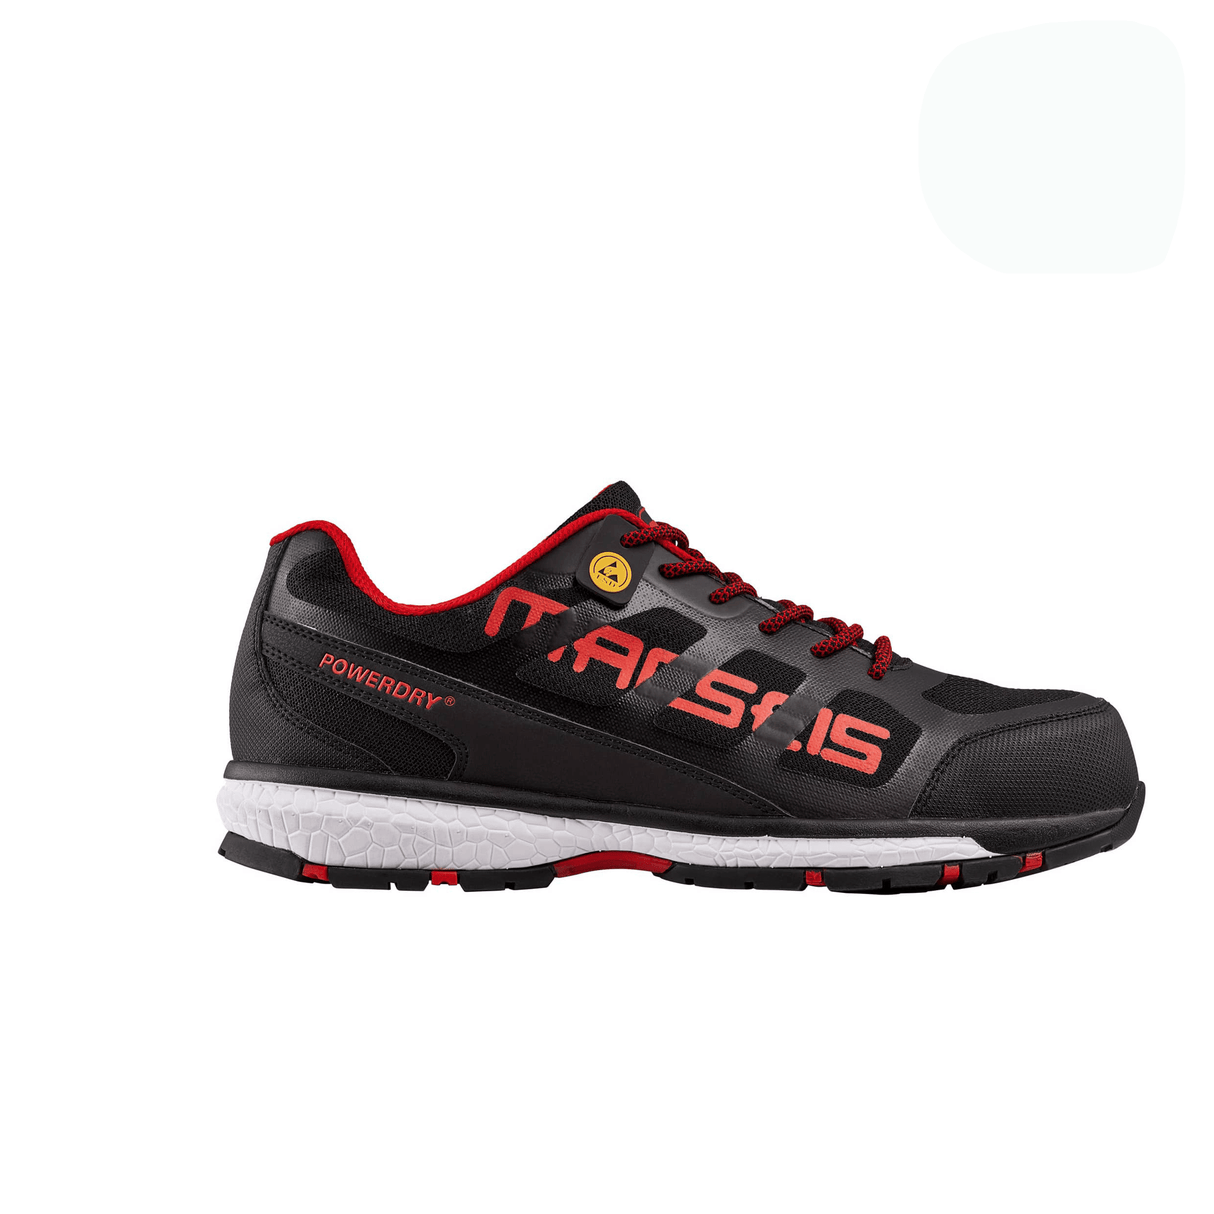 MACTRONIC SAFETY SHOE SP1 SRC ESD BLACK